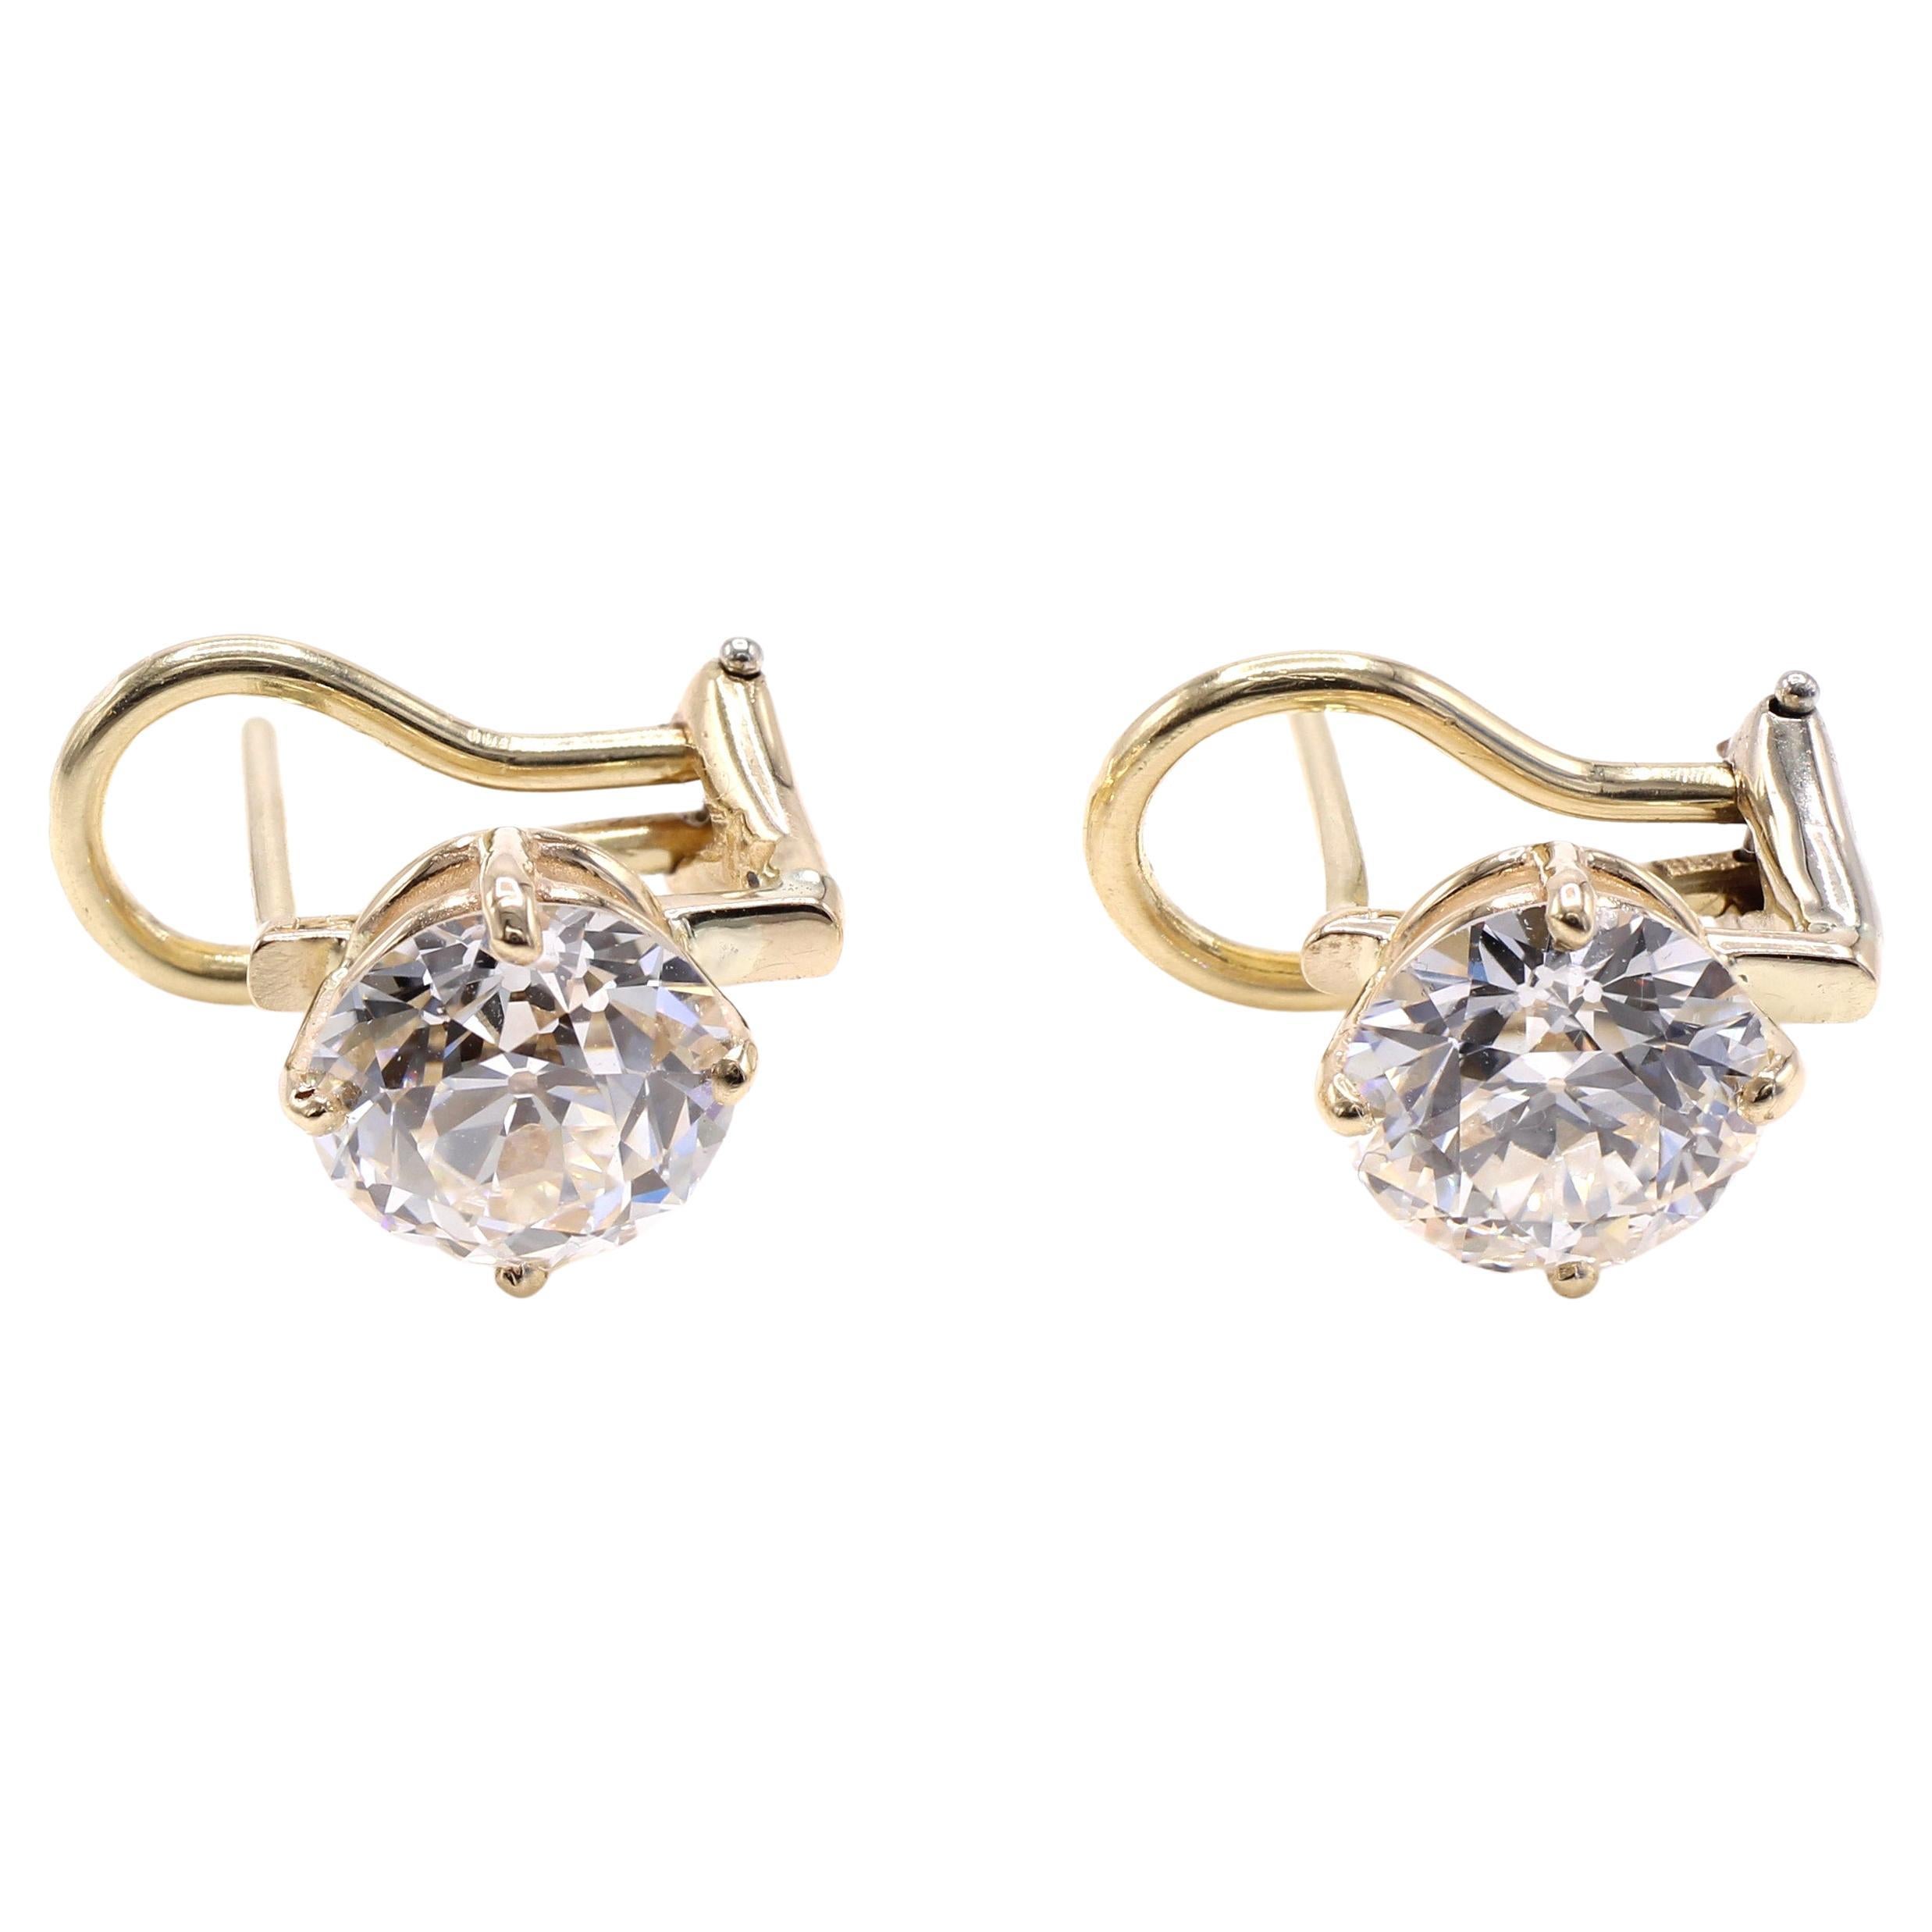 A pair of well matched beautifully cut Old European Cut diamonds are set in yellow gold mount secured by a post and omega clip back. The diamonds are certified by the GIA - one weighing 1.50 carats with a color grade of H and clarity of VVS 2, the